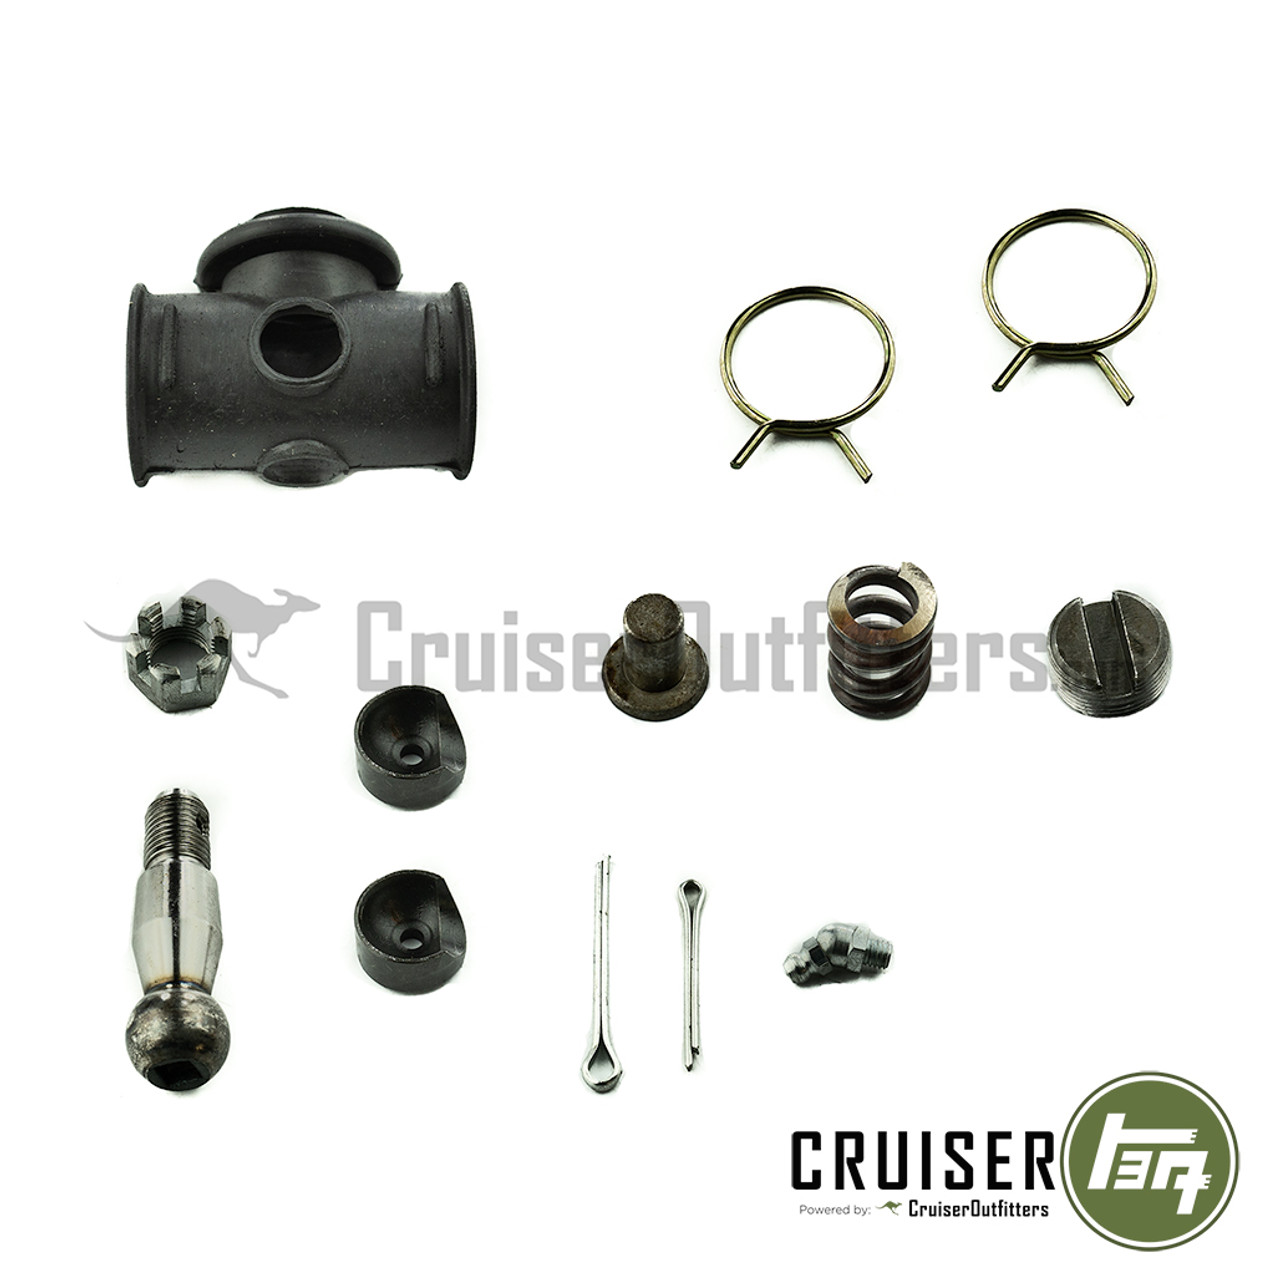 Drag Link Repair Kit - Fits 1980 - 90 6x/7x Series drag link ends, lower  end requires minor trimming of rubber boot (ST60012KAFT)